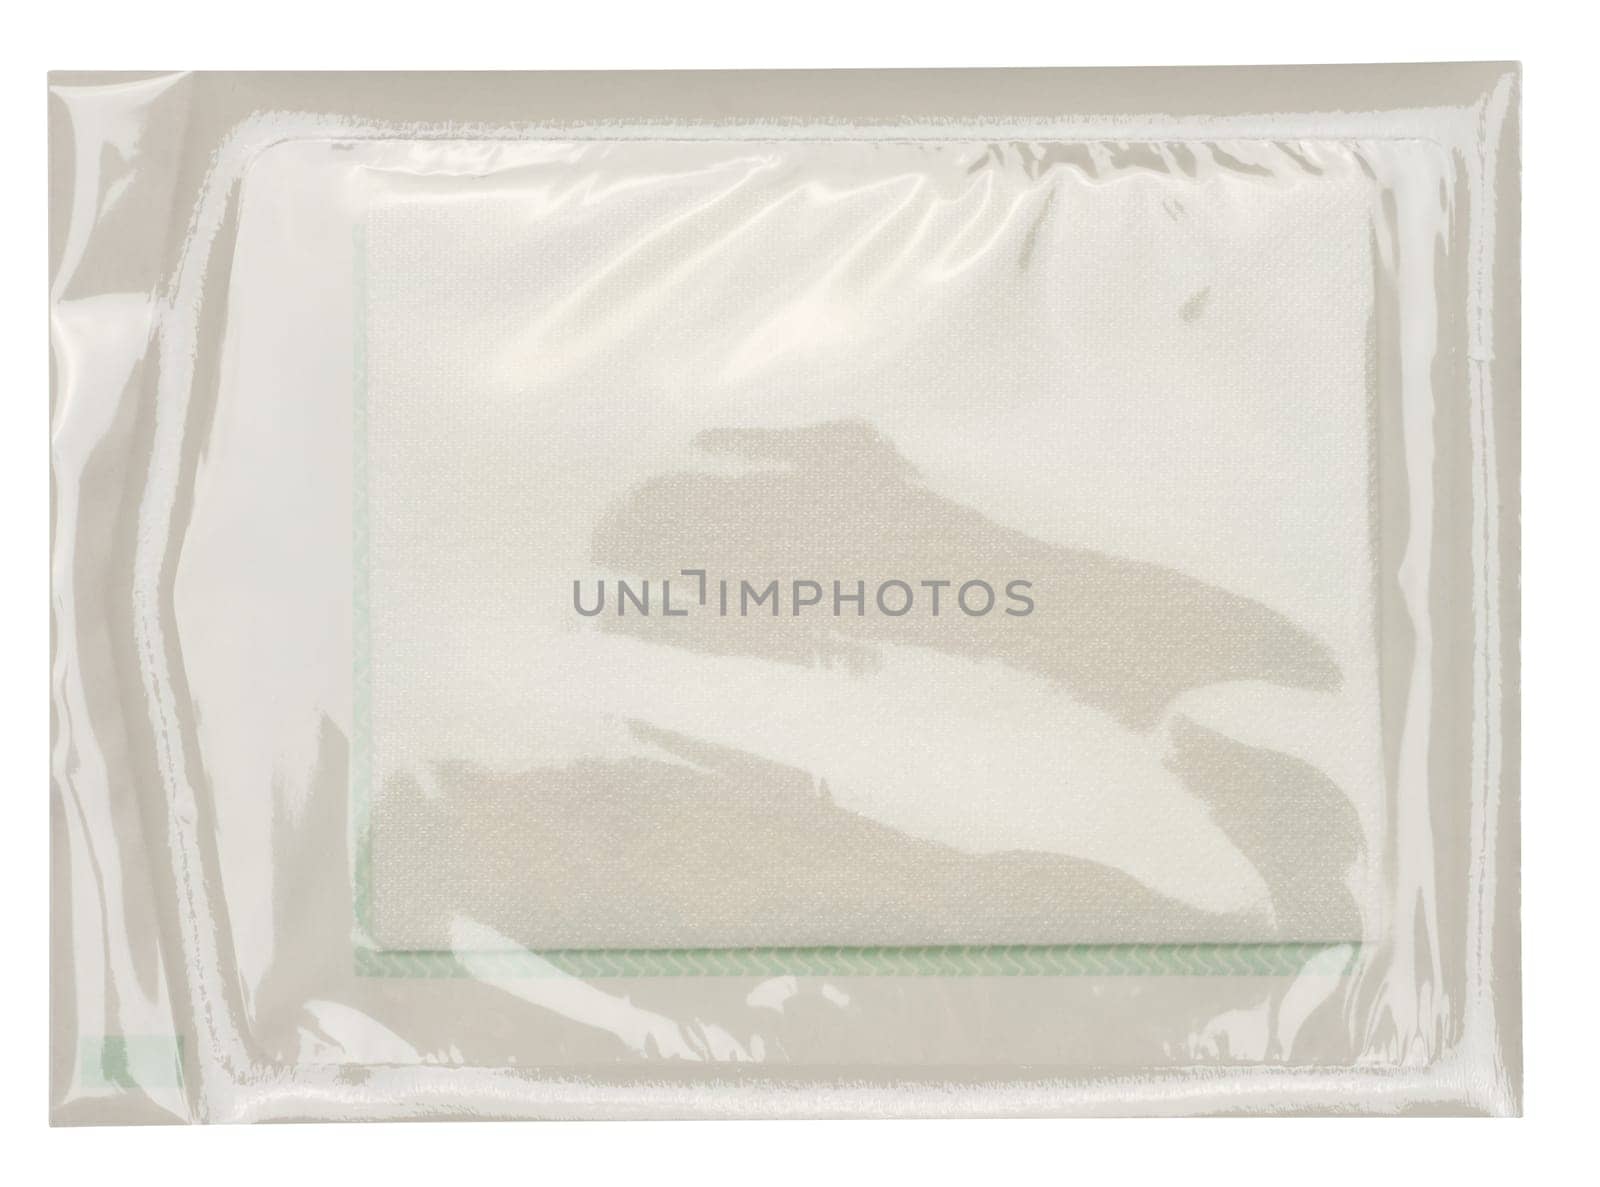 Plastic transparent bag with sterile medical compress on isolated background